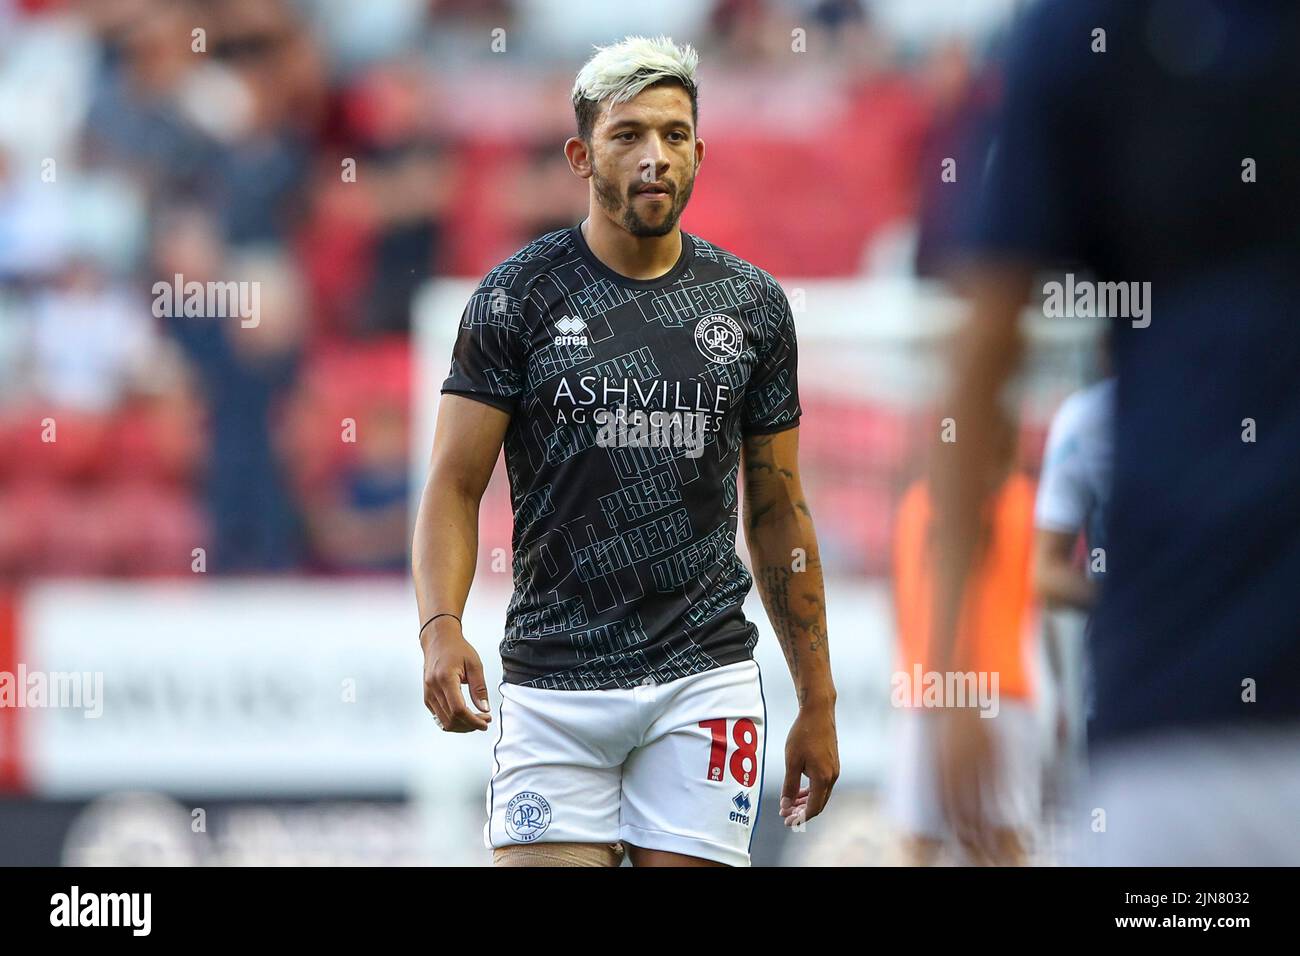 The Valley, London on Tuesday 9th August 2022. Macauley Bonne of Queens Park Rangers during the Carabao Cup match between Charlton Athletic and Queens Park Rangers at The Valley, London on Tuesday 9th August 2022. (Credit: Tom West | MI News) Credit: MI News & Sport /Alamy Live News Stock Photo